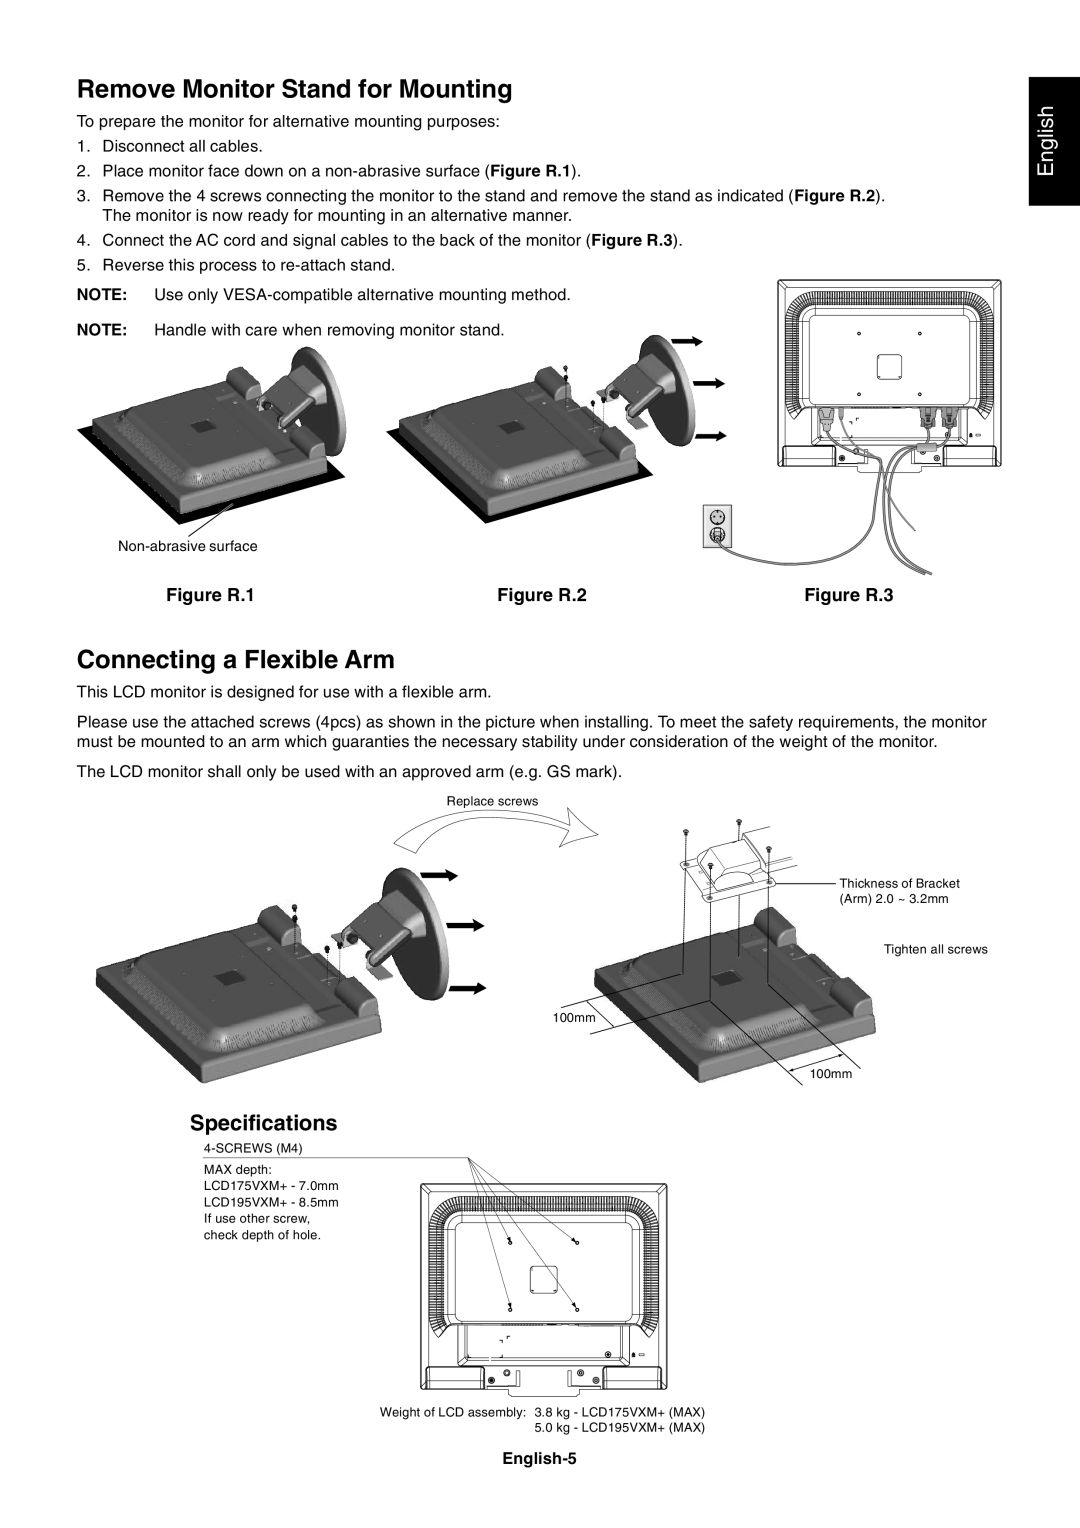 NEC LCD175VXM+ Remove Monitor Stand for Mounting, Connecting a Flexible Arm, English, Figure R.1, Figure R.2, Figure R.3 